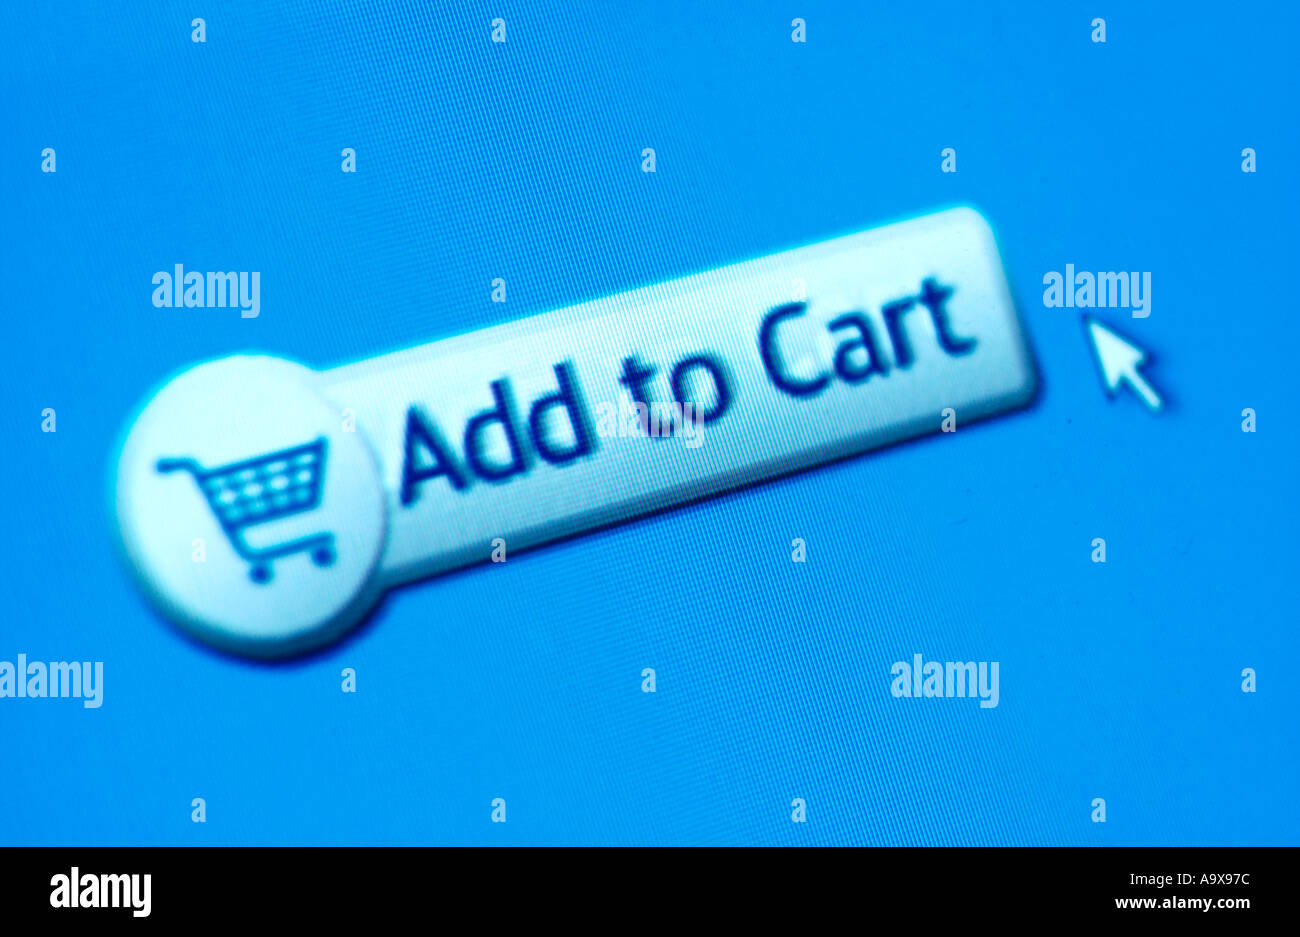 Add to cart online shopping Stock Photo